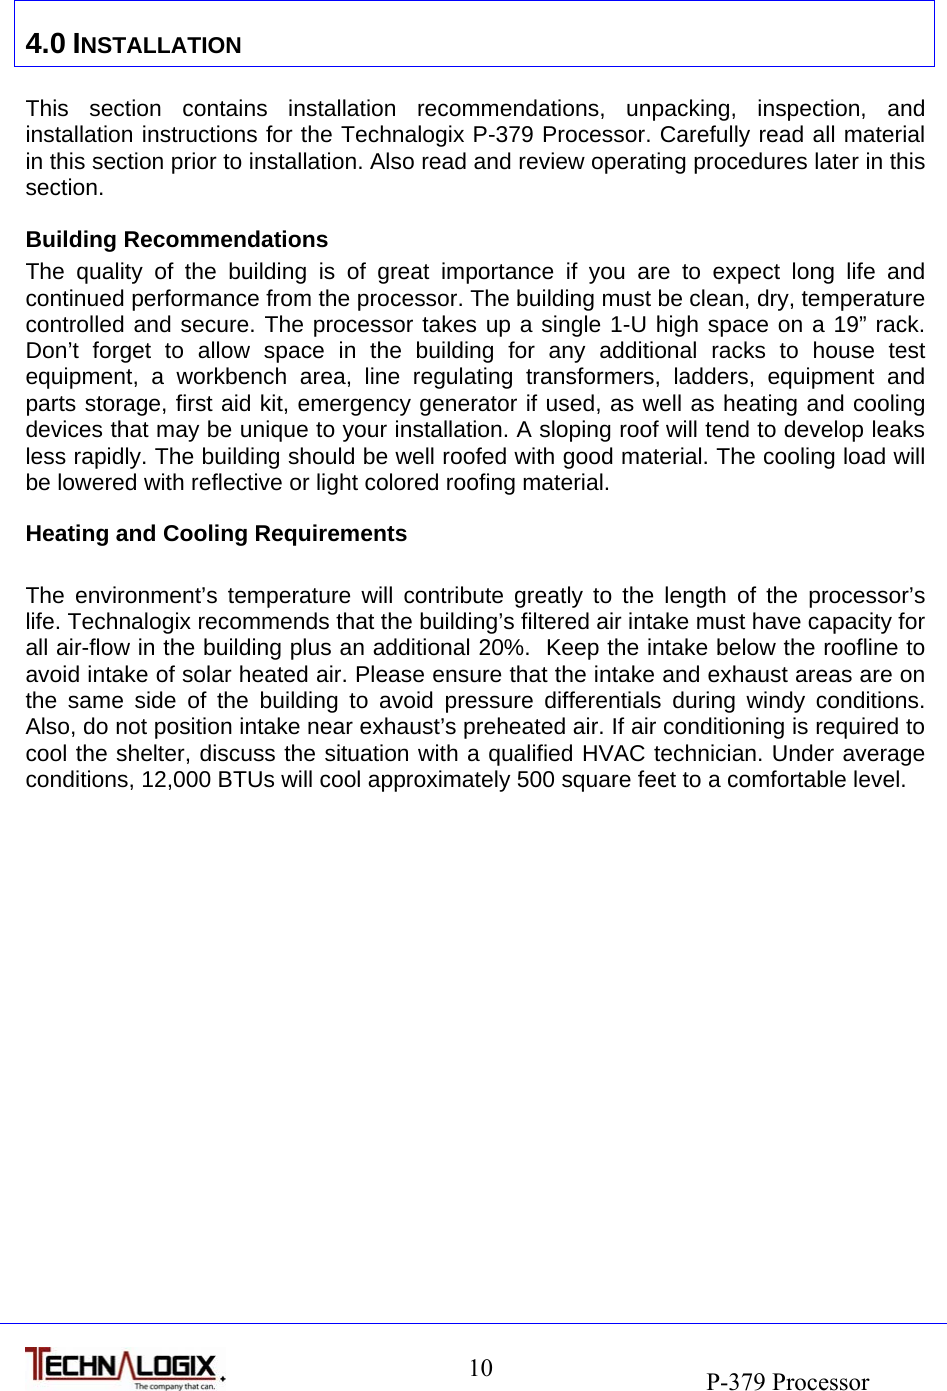                                                                               P-379 Processor 10 4.0 INSTALLATION  This section contains installation recommendations, unpacking, inspection, and installation instructions for the Technalogix P-379 Processor. Carefully read all material in this section prior to installation. Also read and review operating procedures later in this section. Building Recommendations The quality of the building is of great importance if you are to expect long life and continued performance from the processor. The building must be clean, dry, temperature controlled and secure. The processor takes up a single 1-U high space on a 19” rack. Don’t forget to allow space in the building for any additional racks to house test equipment, a workbench area, line regulating transformers, ladders, equipment and parts storage, first aid kit, emergency generator if used, as well as heating and cooling devices that may be unique to your installation. A sloping roof will tend to develop leaks less rapidly. The building should be well roofed with good material. The cooling load will be lowered with reflective or light colored roofing material. Heating and Cooling Requirements  The environment’s temperature will contribute greatly to the length of the processor’s life. Technalogix recommends that the building’s filtered air intake must have capacity for all air-flow in the building plus an additional 20%.  Keep the intake below the roofline to avoid intake of solar heated air. Please ensure that the intake and exhaust areas are on the same side of the building to avoid pressure differentials during windy conditions. Also, do not position intake near exhaust’s preheated air. If air conditioning is required to cool the shelter, discuss the situation with a qualified HVAC technician. Under average conditions, 12,000 BTUs will cool approximately 500 square feet to a comfortable level. 